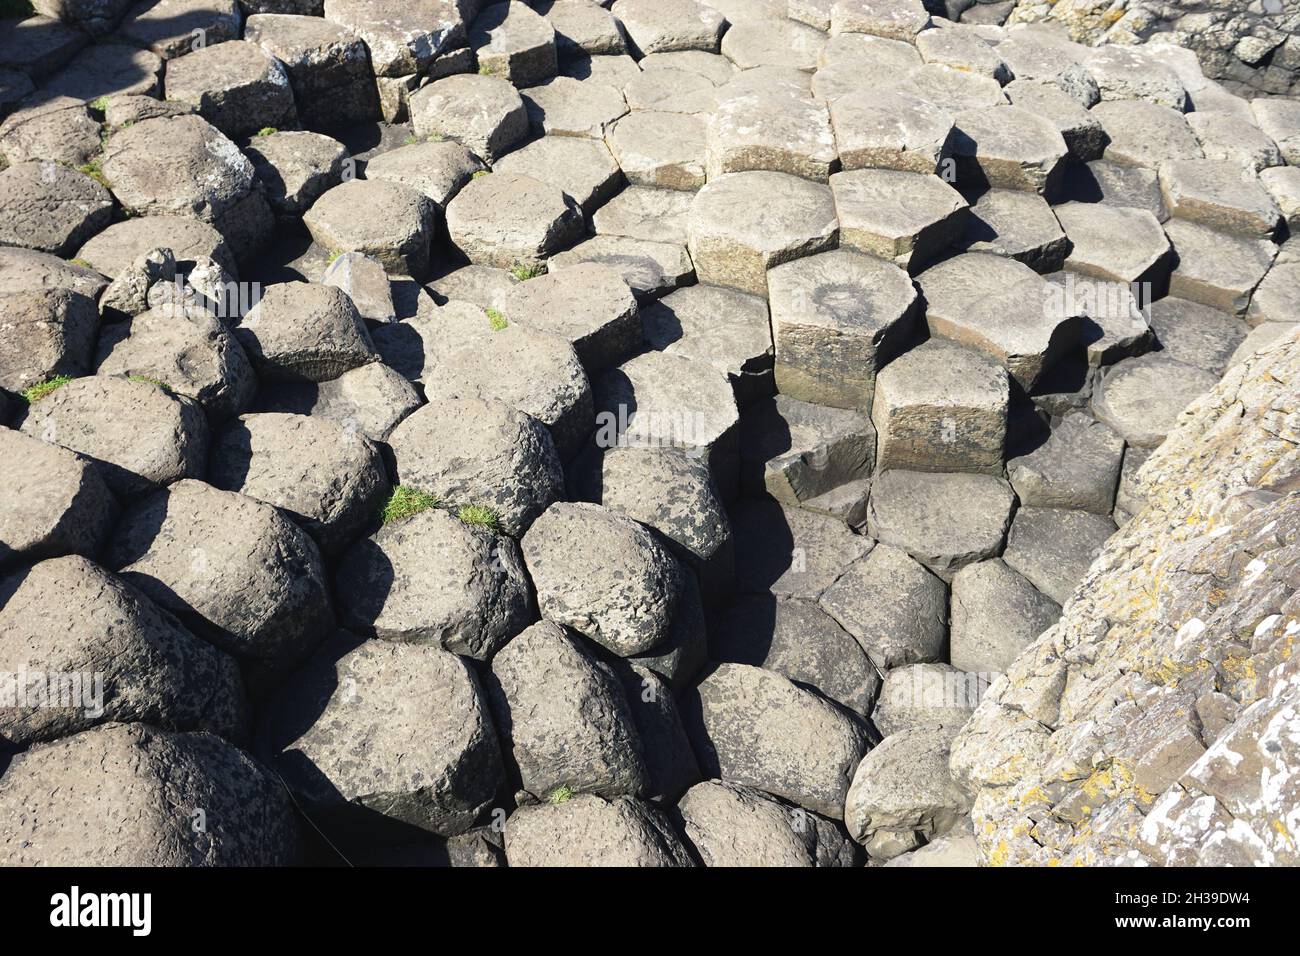 Detail of natural volcanic rock formations with interlocking shapes at the Giant’s Causeway, in County Antrim on the north coast of Northern Ireland Stock Photo